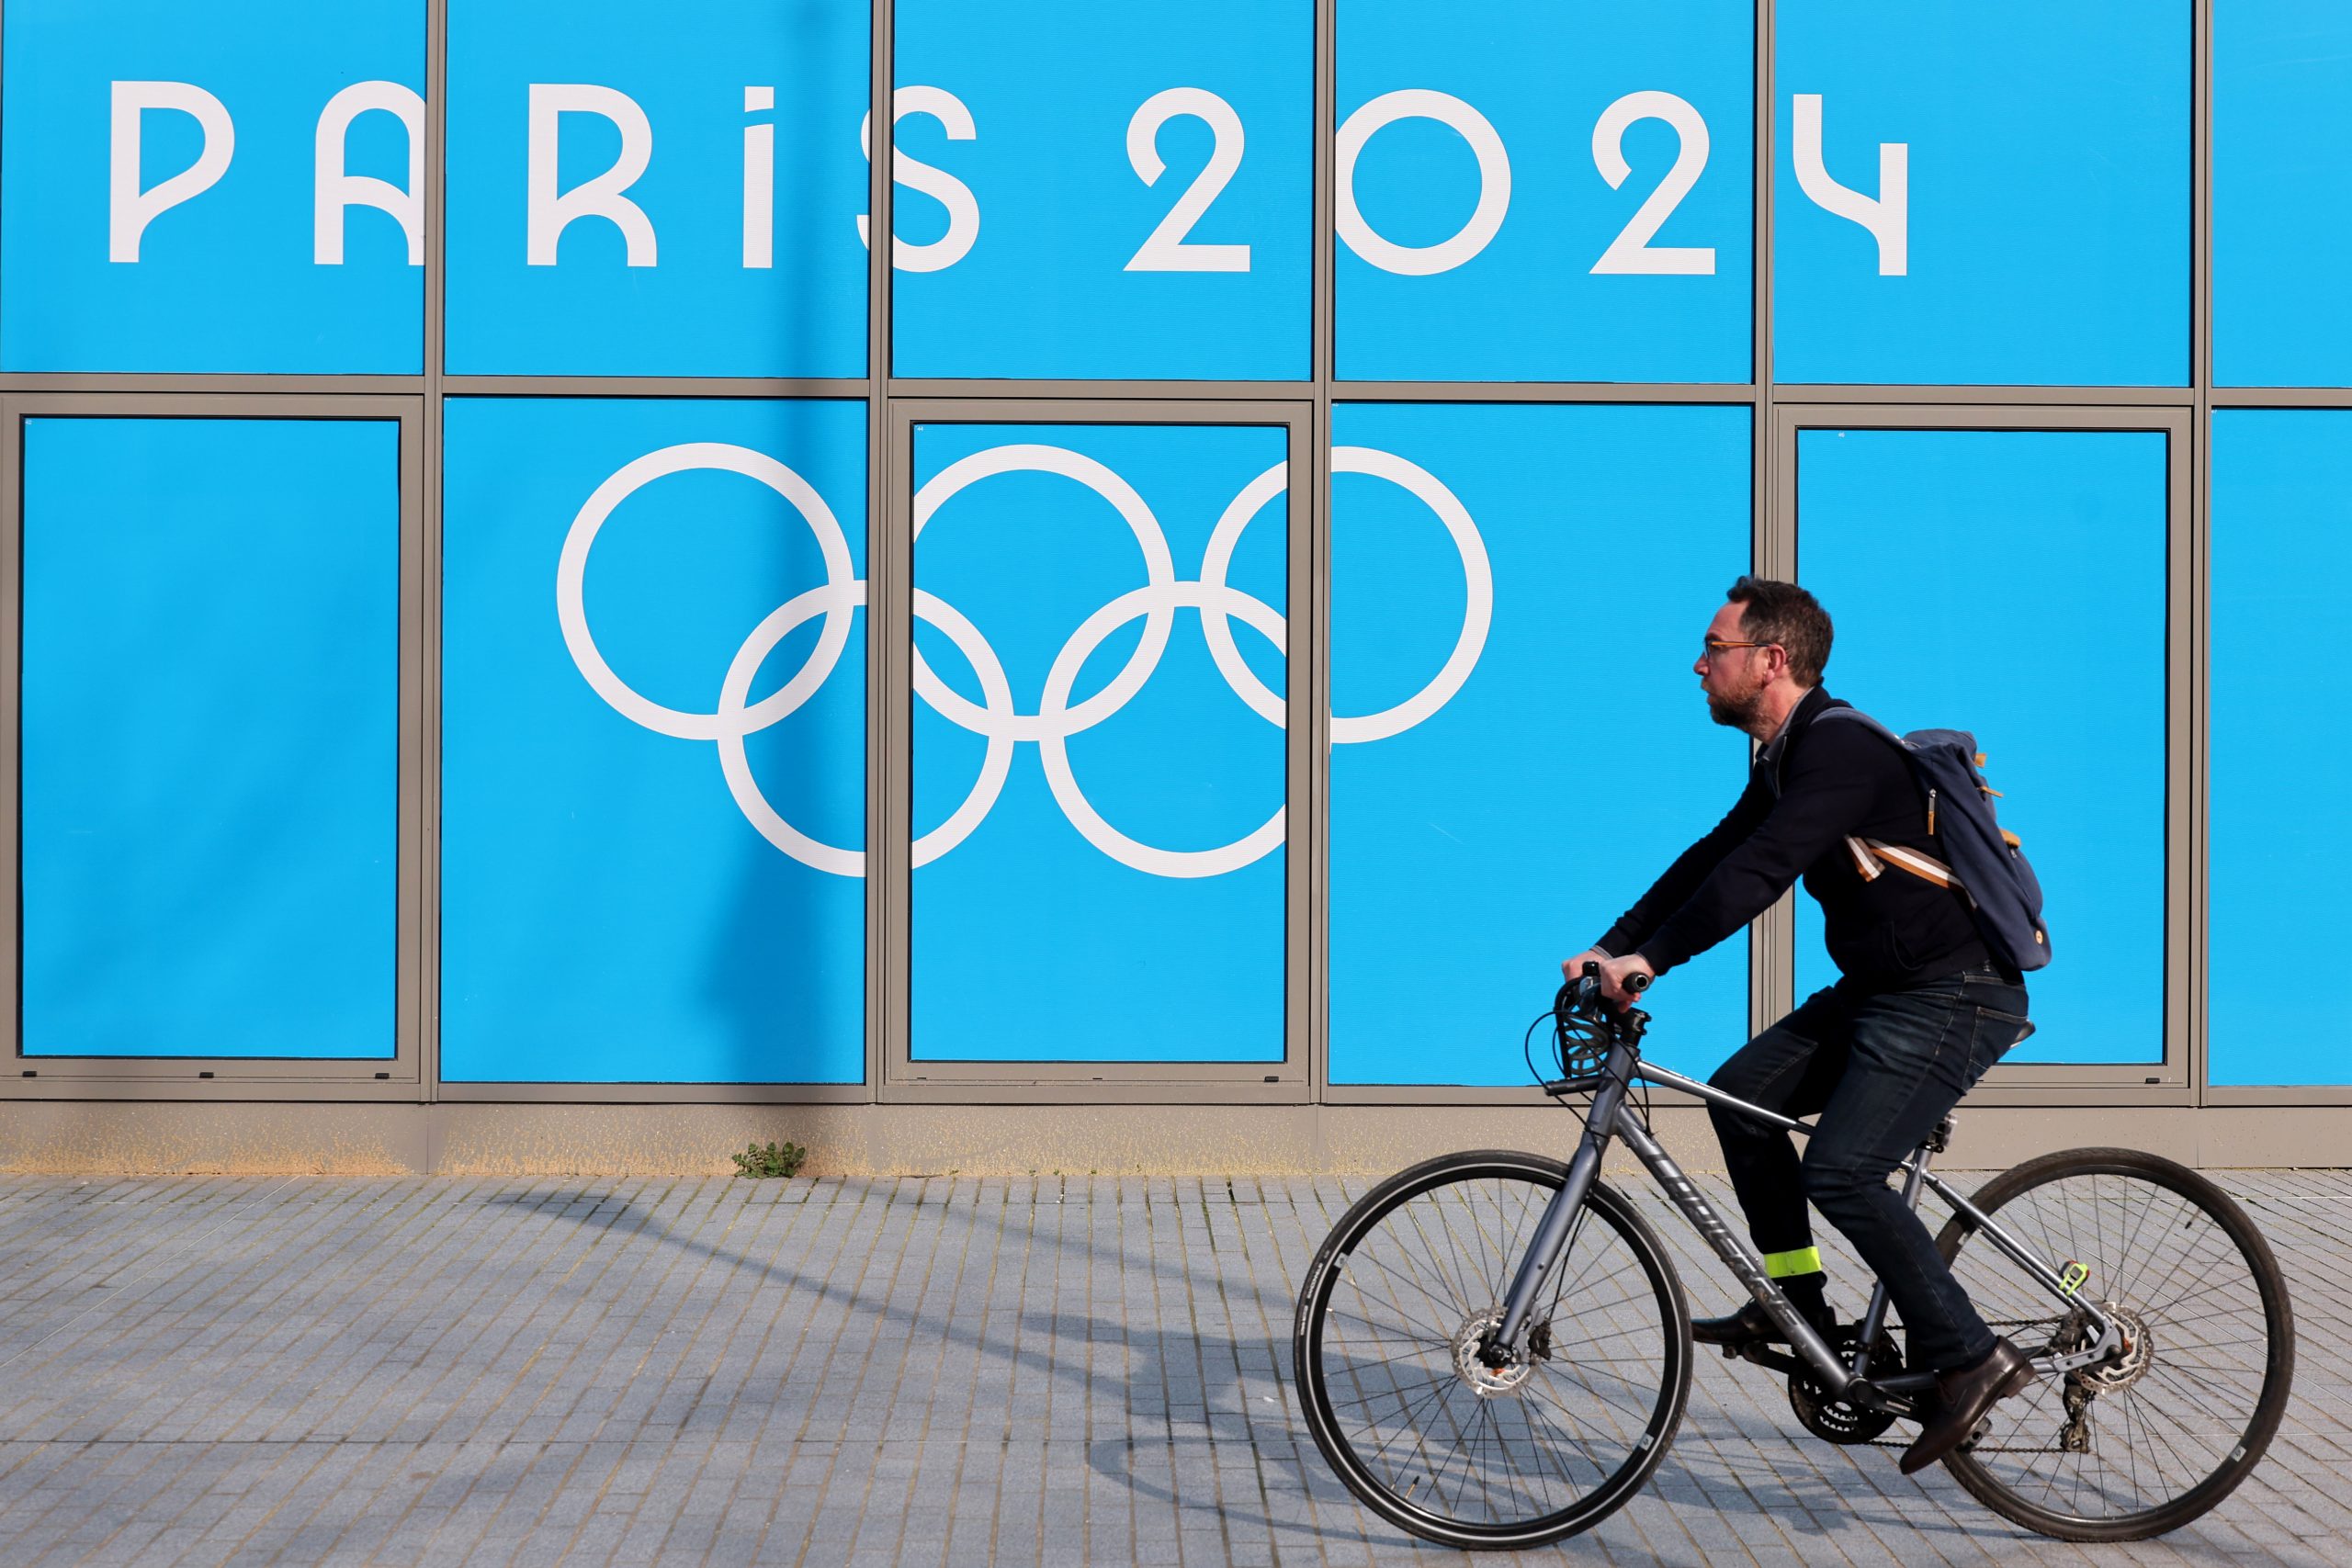 The Paris 2024 logo, representing the Olympic and Paralympic games, is seen 128 Days prior to the s...